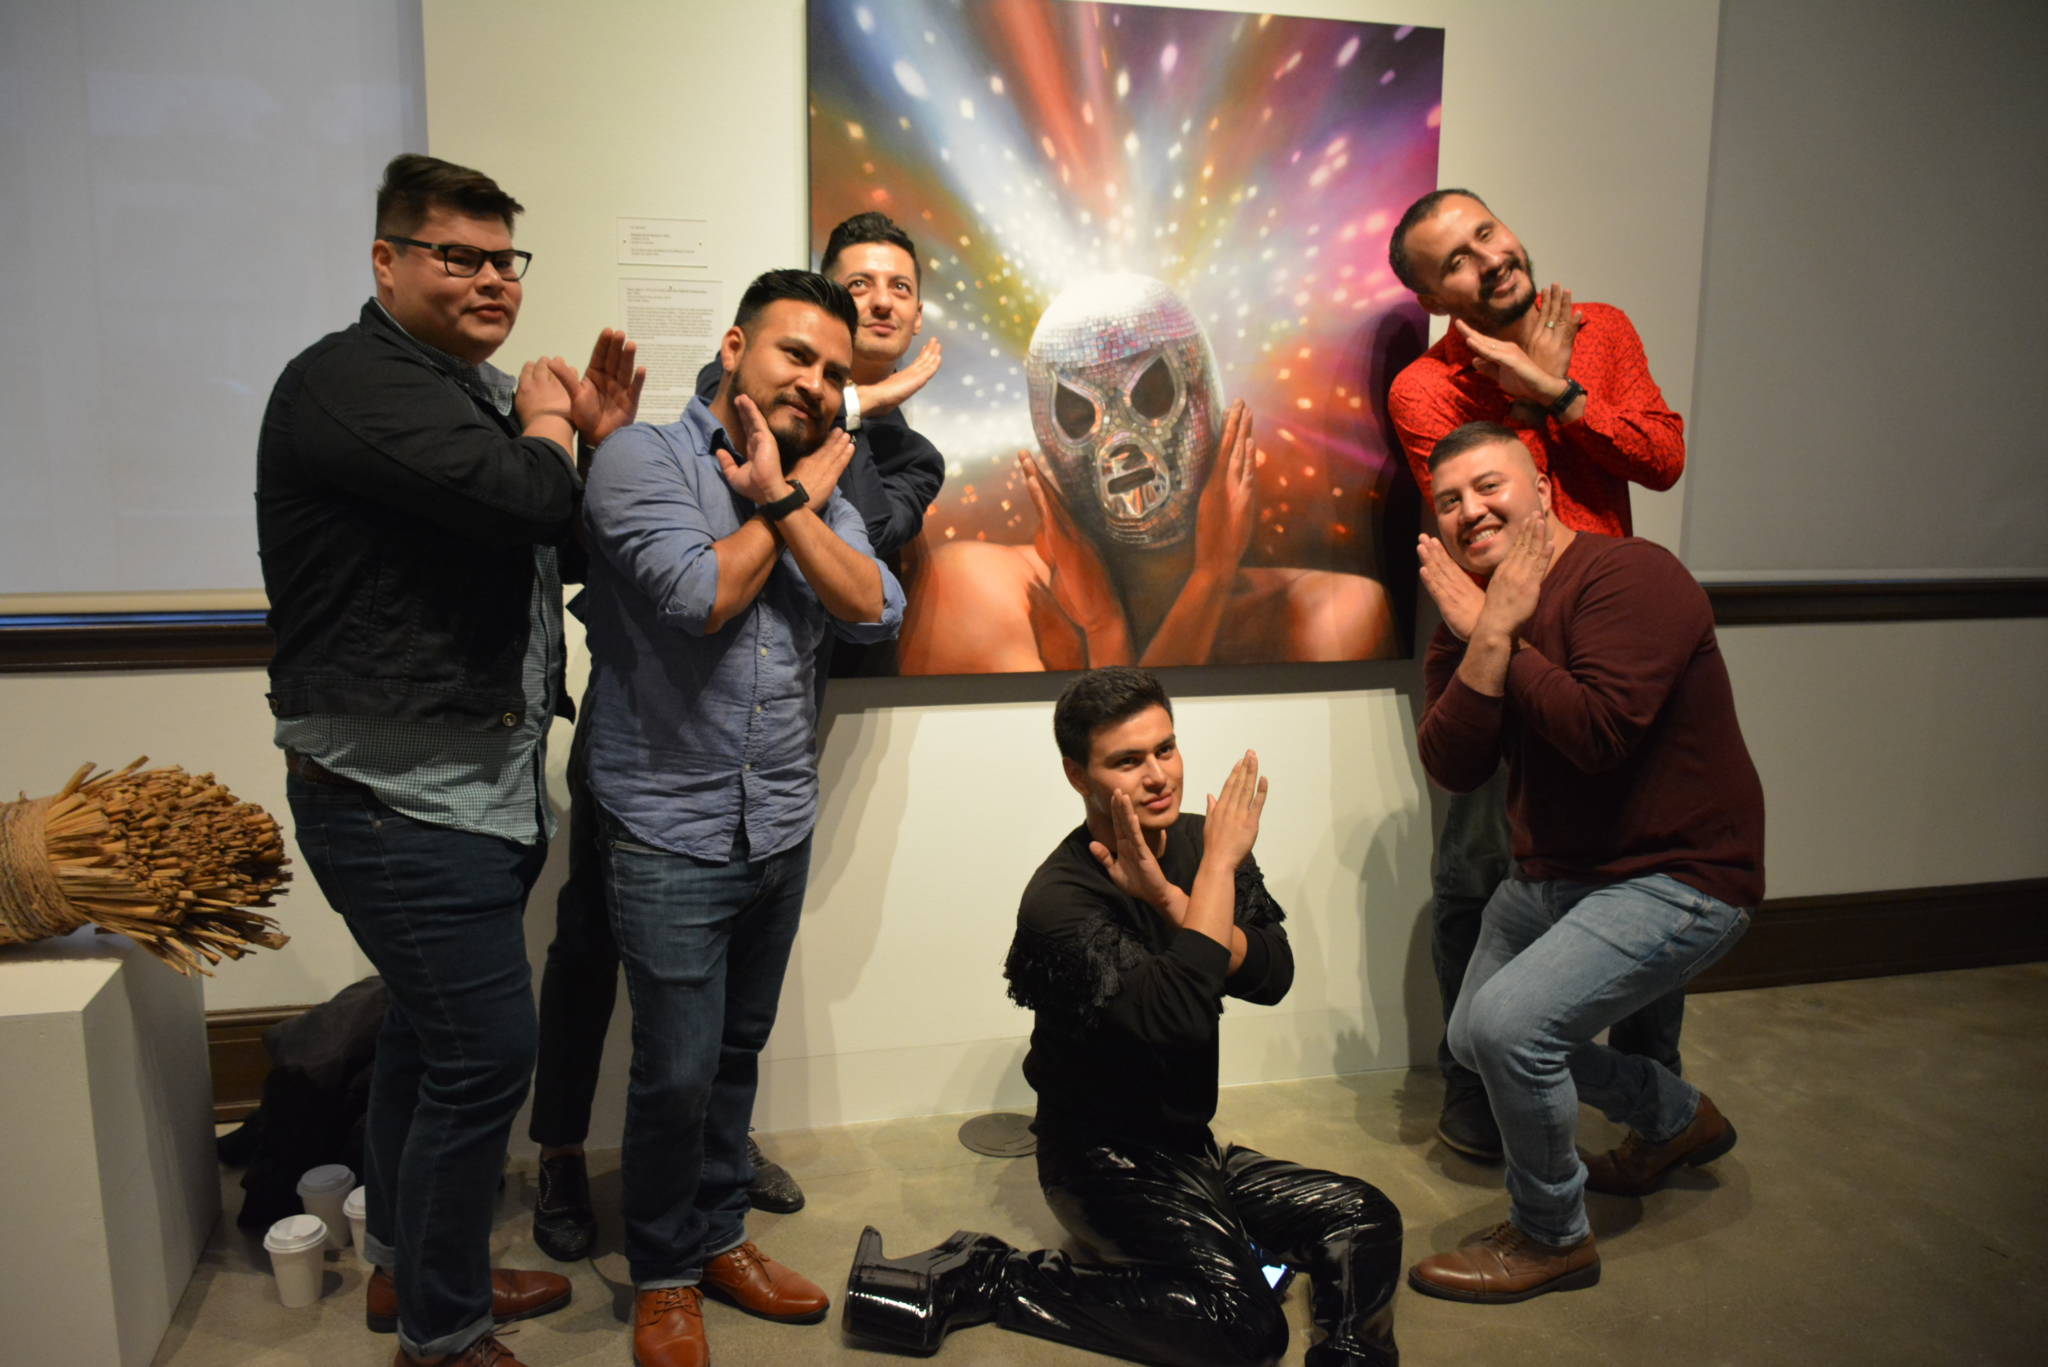 Orlando de la Garza with his painting and friends at the SFAC gallery.